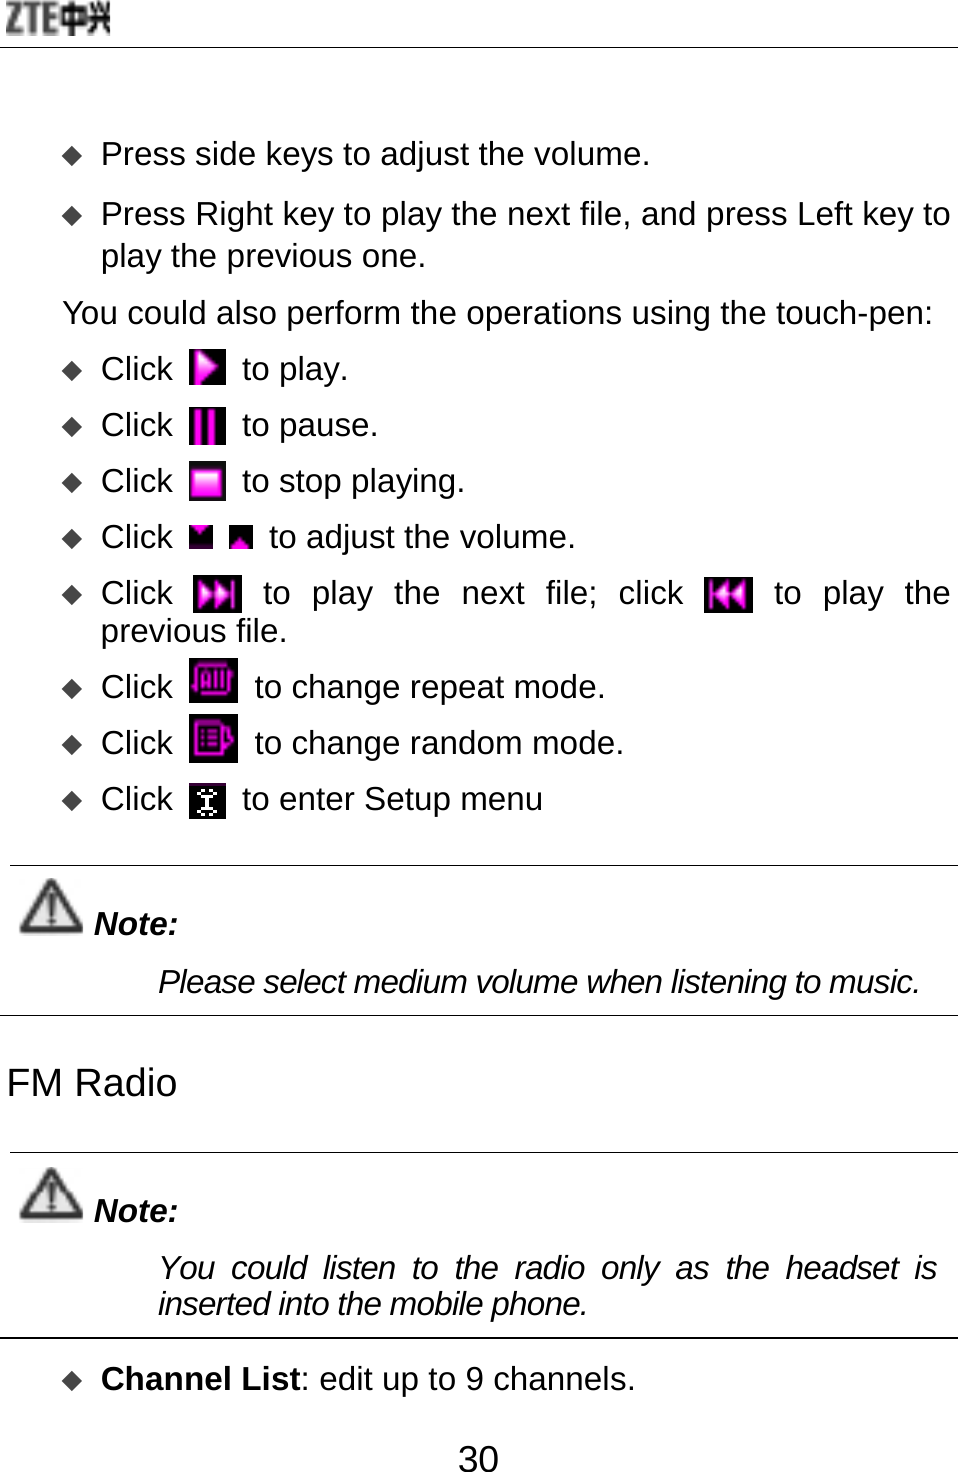  30  Press side keys to adjust the volume.  Press Right key to play the next file, and press Left key to play the previous one.   You could also perform the operations using the touch-pen:    Click  to play.  Click  to pause.  Click  to stop playing.  Click    to adjust the volume.  Click  to play the next file; click  to play the previous file.  Click   to change repeat mode.  Click   to change random mode.  Click   to enter Setup menu  Note: Please select medium volume when listening to music.  FM Radio  Note: You could listen to the radio only as the headset is inserted into the mobile phone.   Channel List: edit up to 9 channels. 